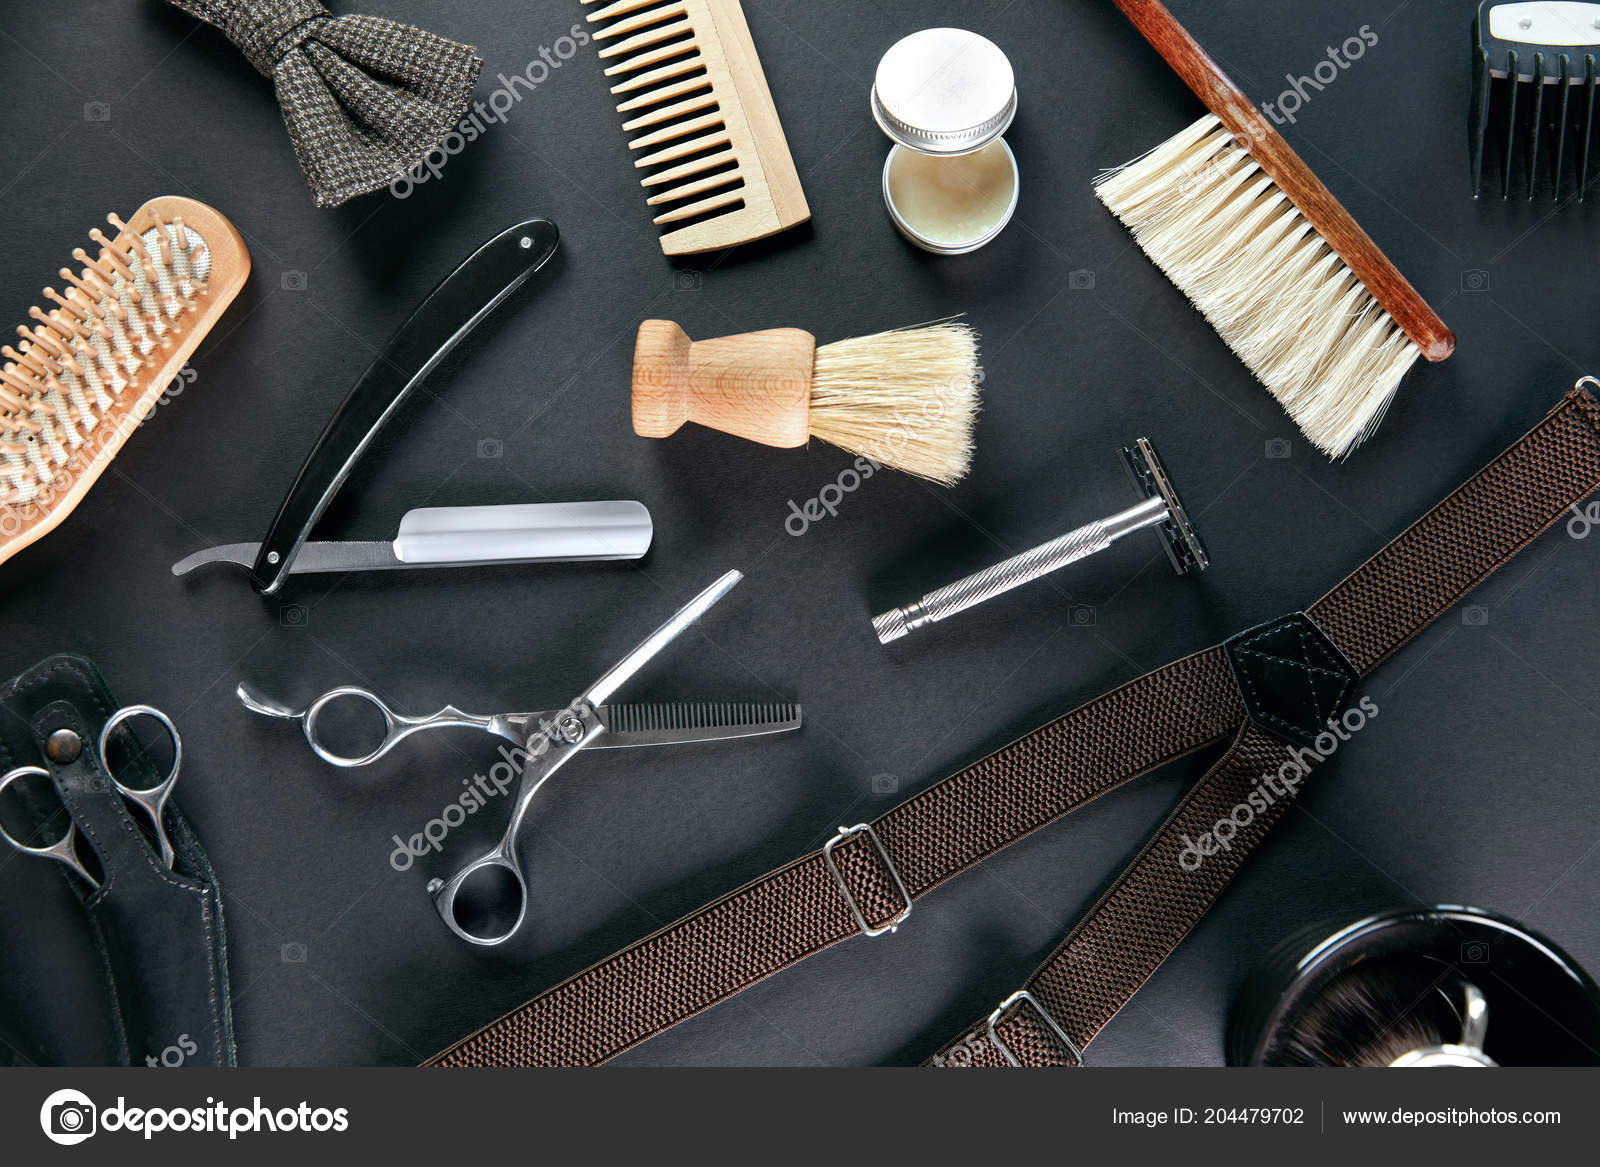 Barber Shop Tools Equipment Men's Grooming Tools Accessory Grey Background Stock by ©puhhha 204479702